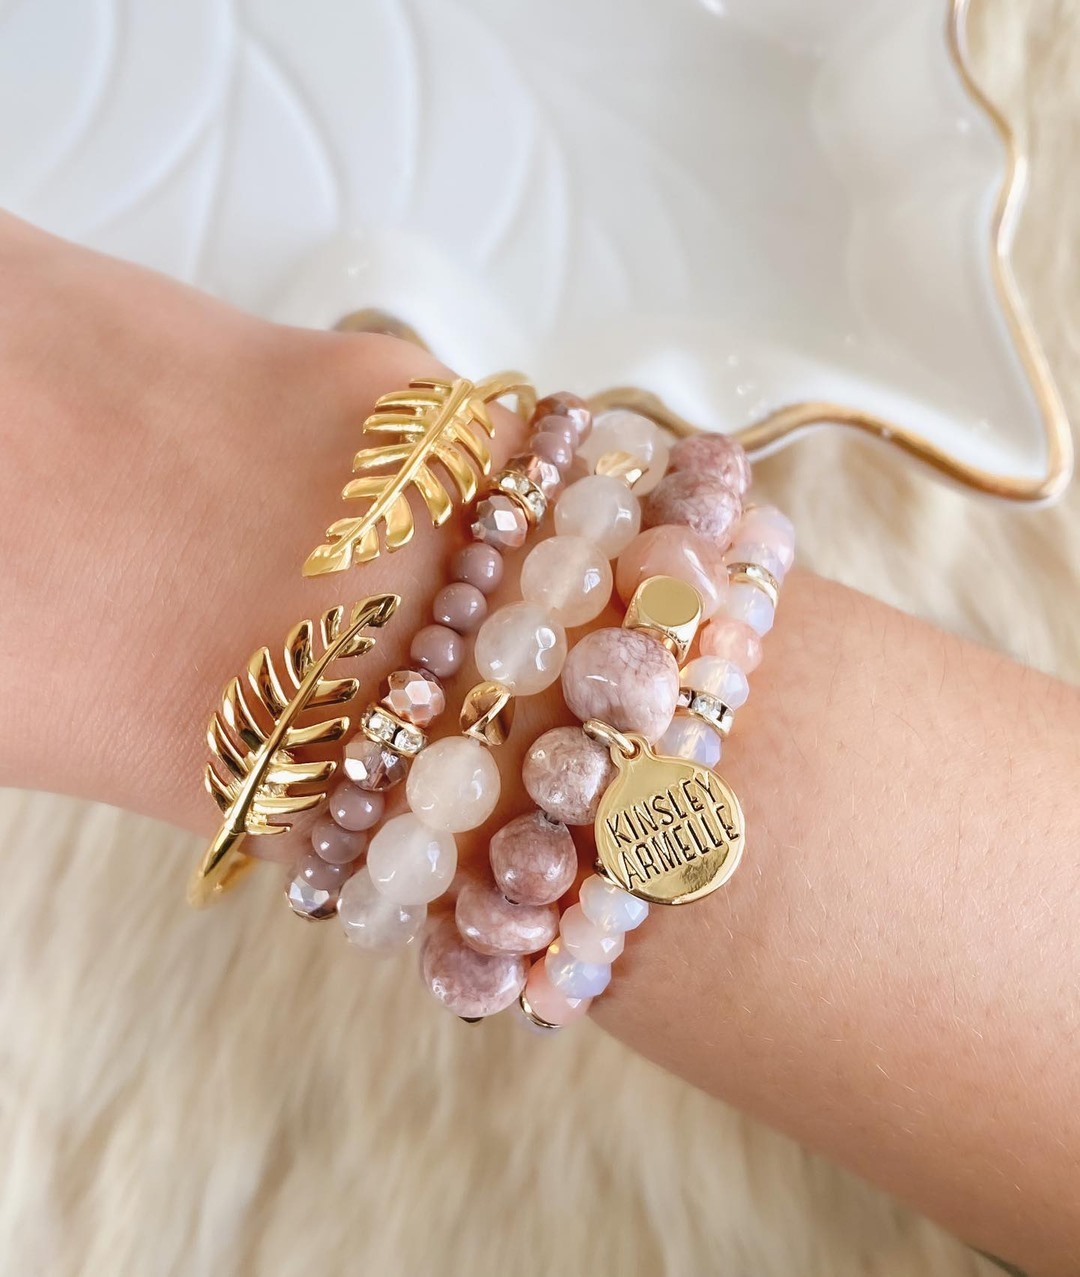 Stacked Collection - Clay Bracelet Set | Kinsley Armelle® Official